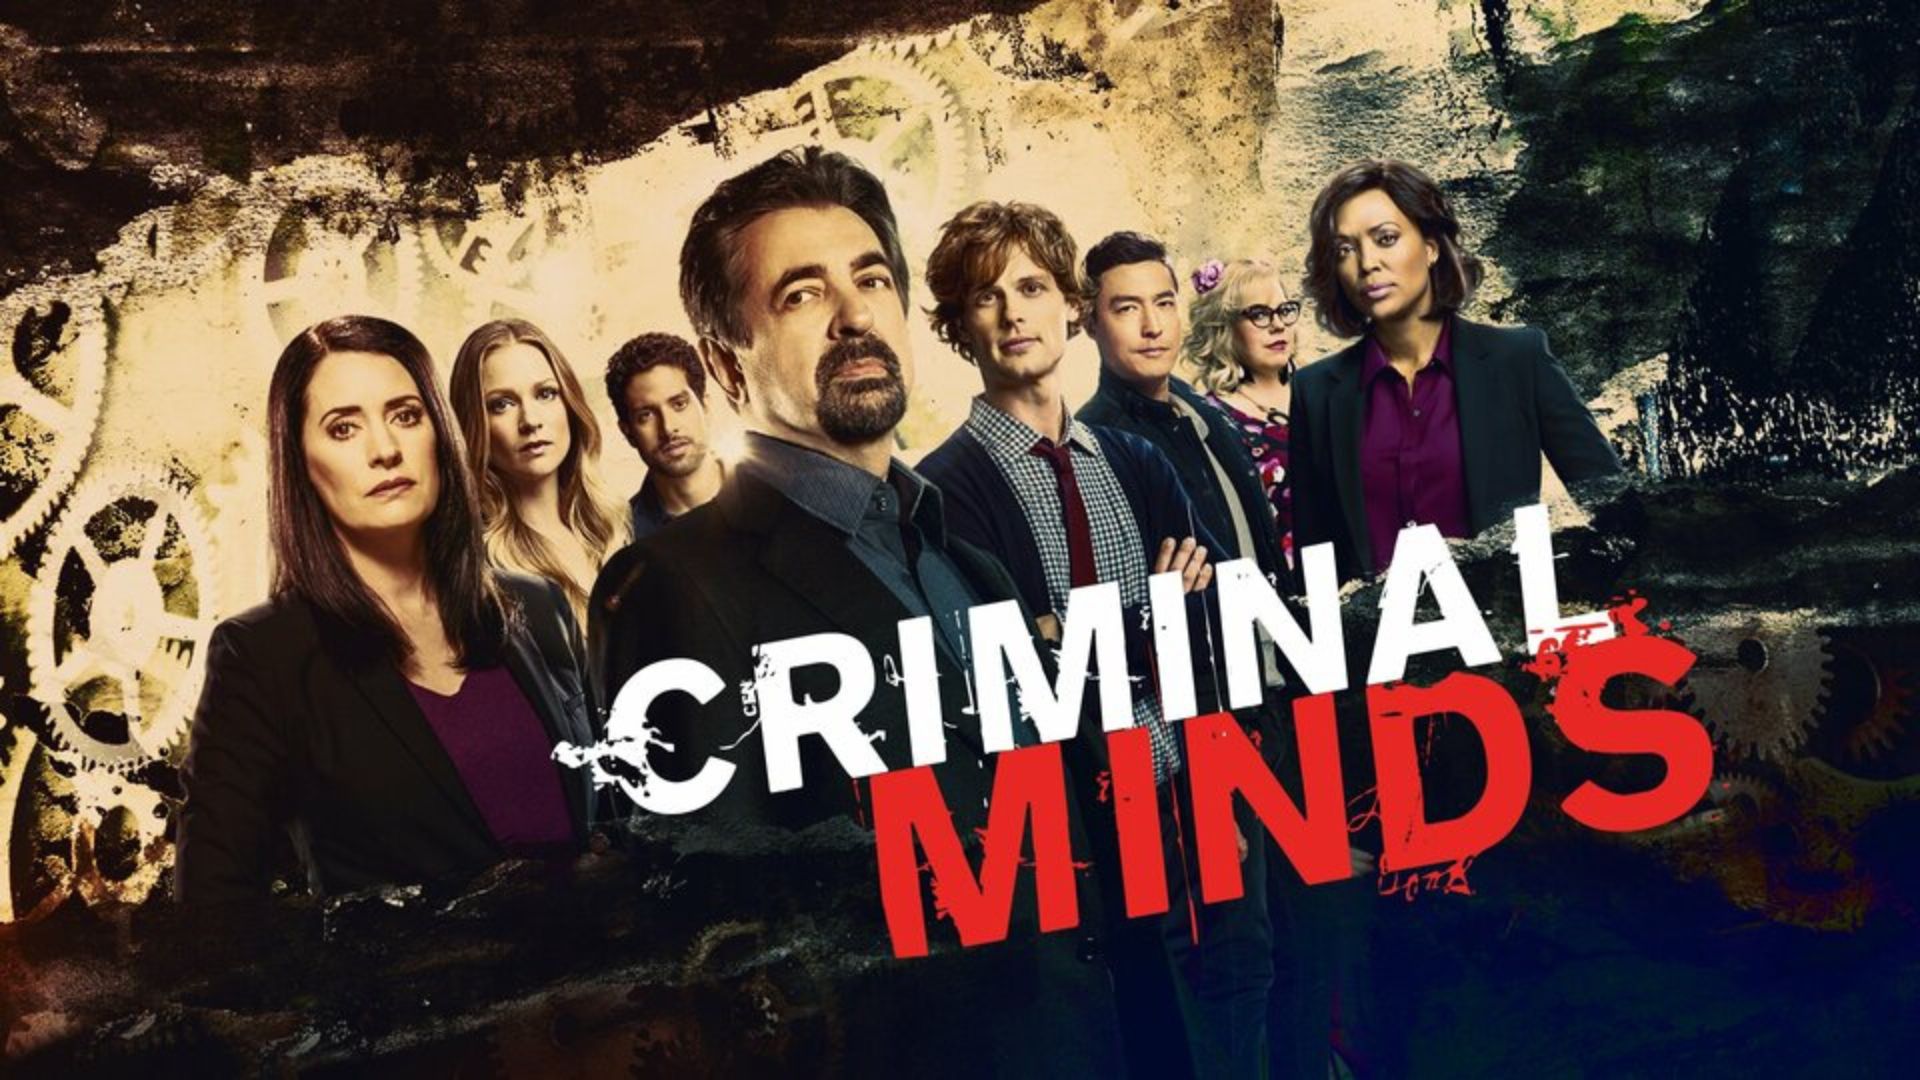 Where to Watch Criminal Minds?